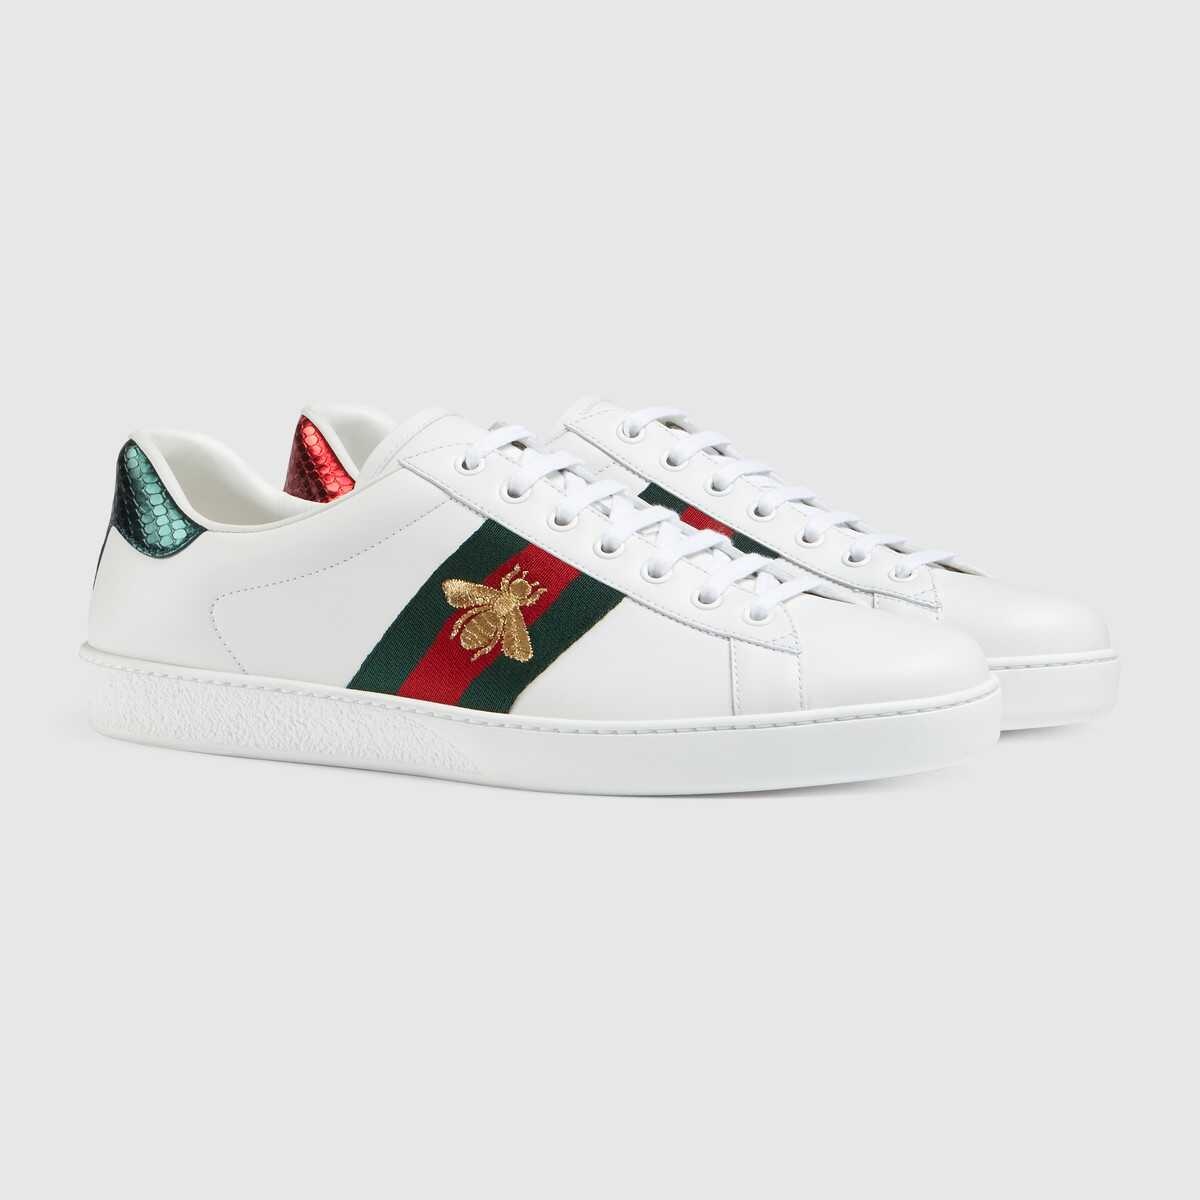 Men's Ace embroidered sneaker - 2